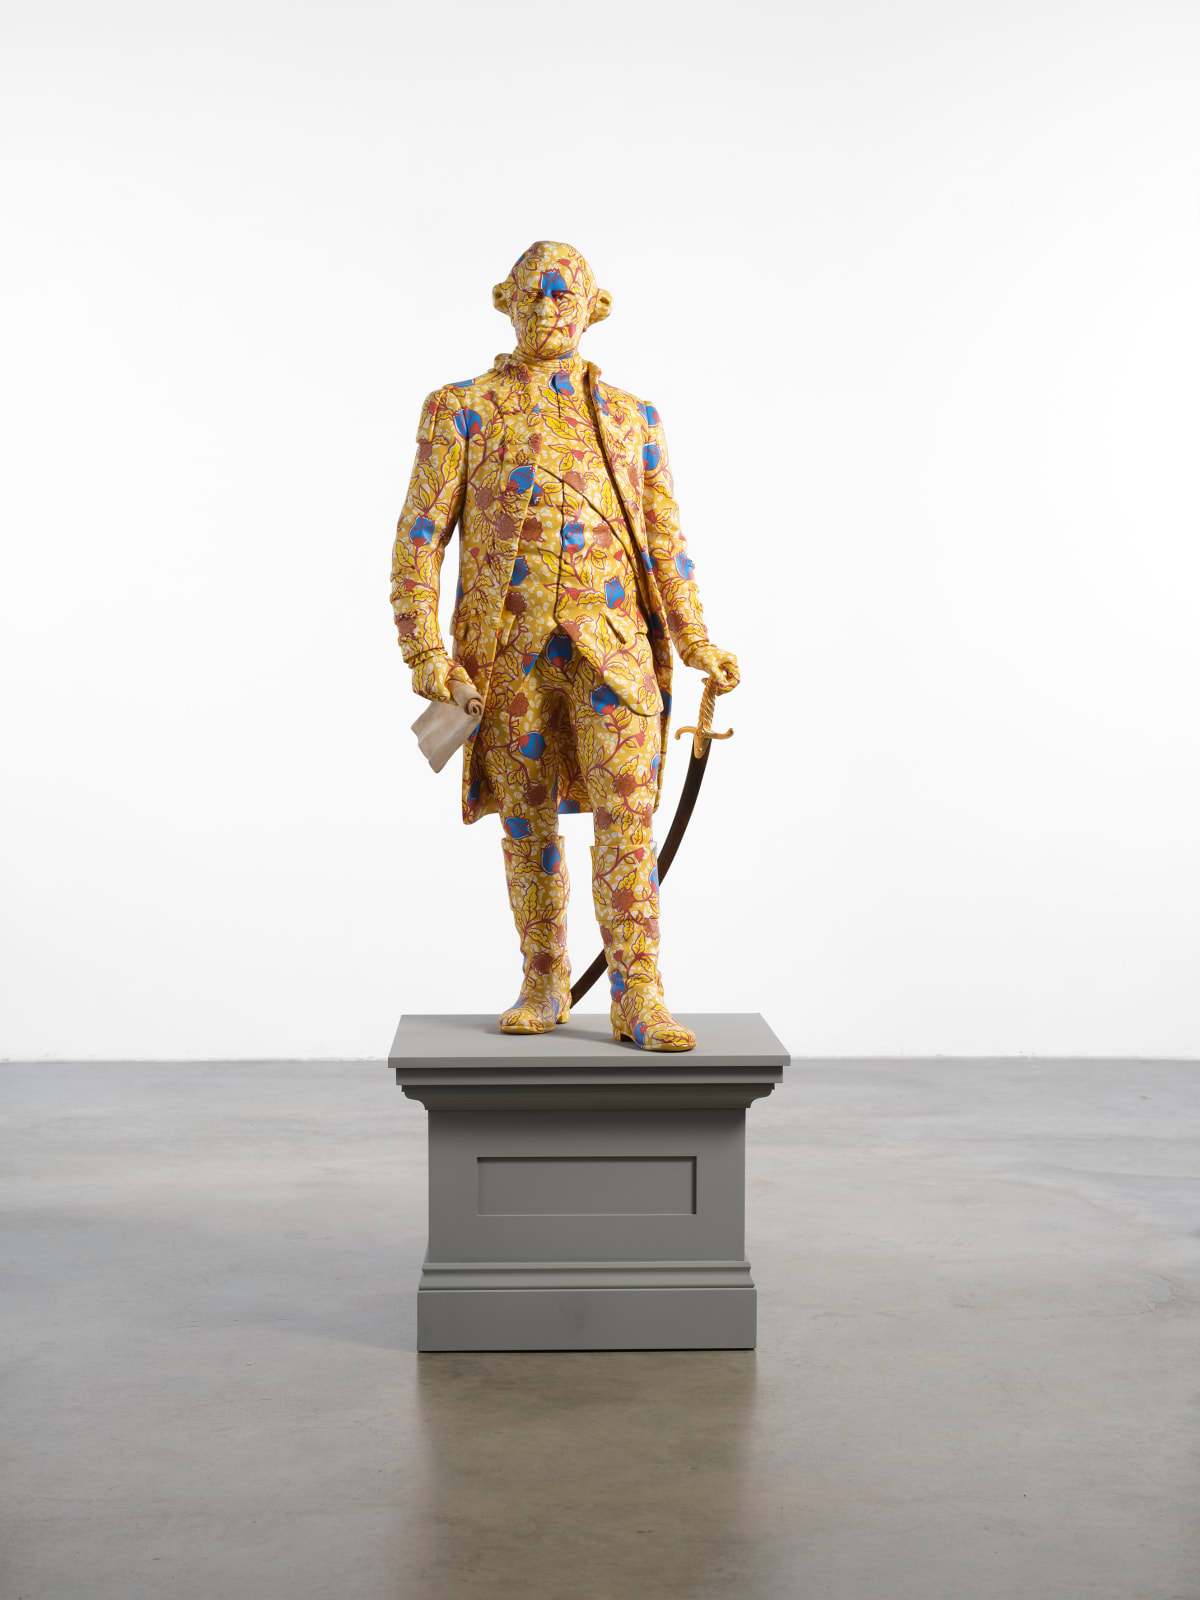 <div class="artist">Yinka Shonibare CBE RA</div><div class="title_and_year"><span class="title">Decolonised Structures (Clive)</span><span class="year">, 2022</span></div>